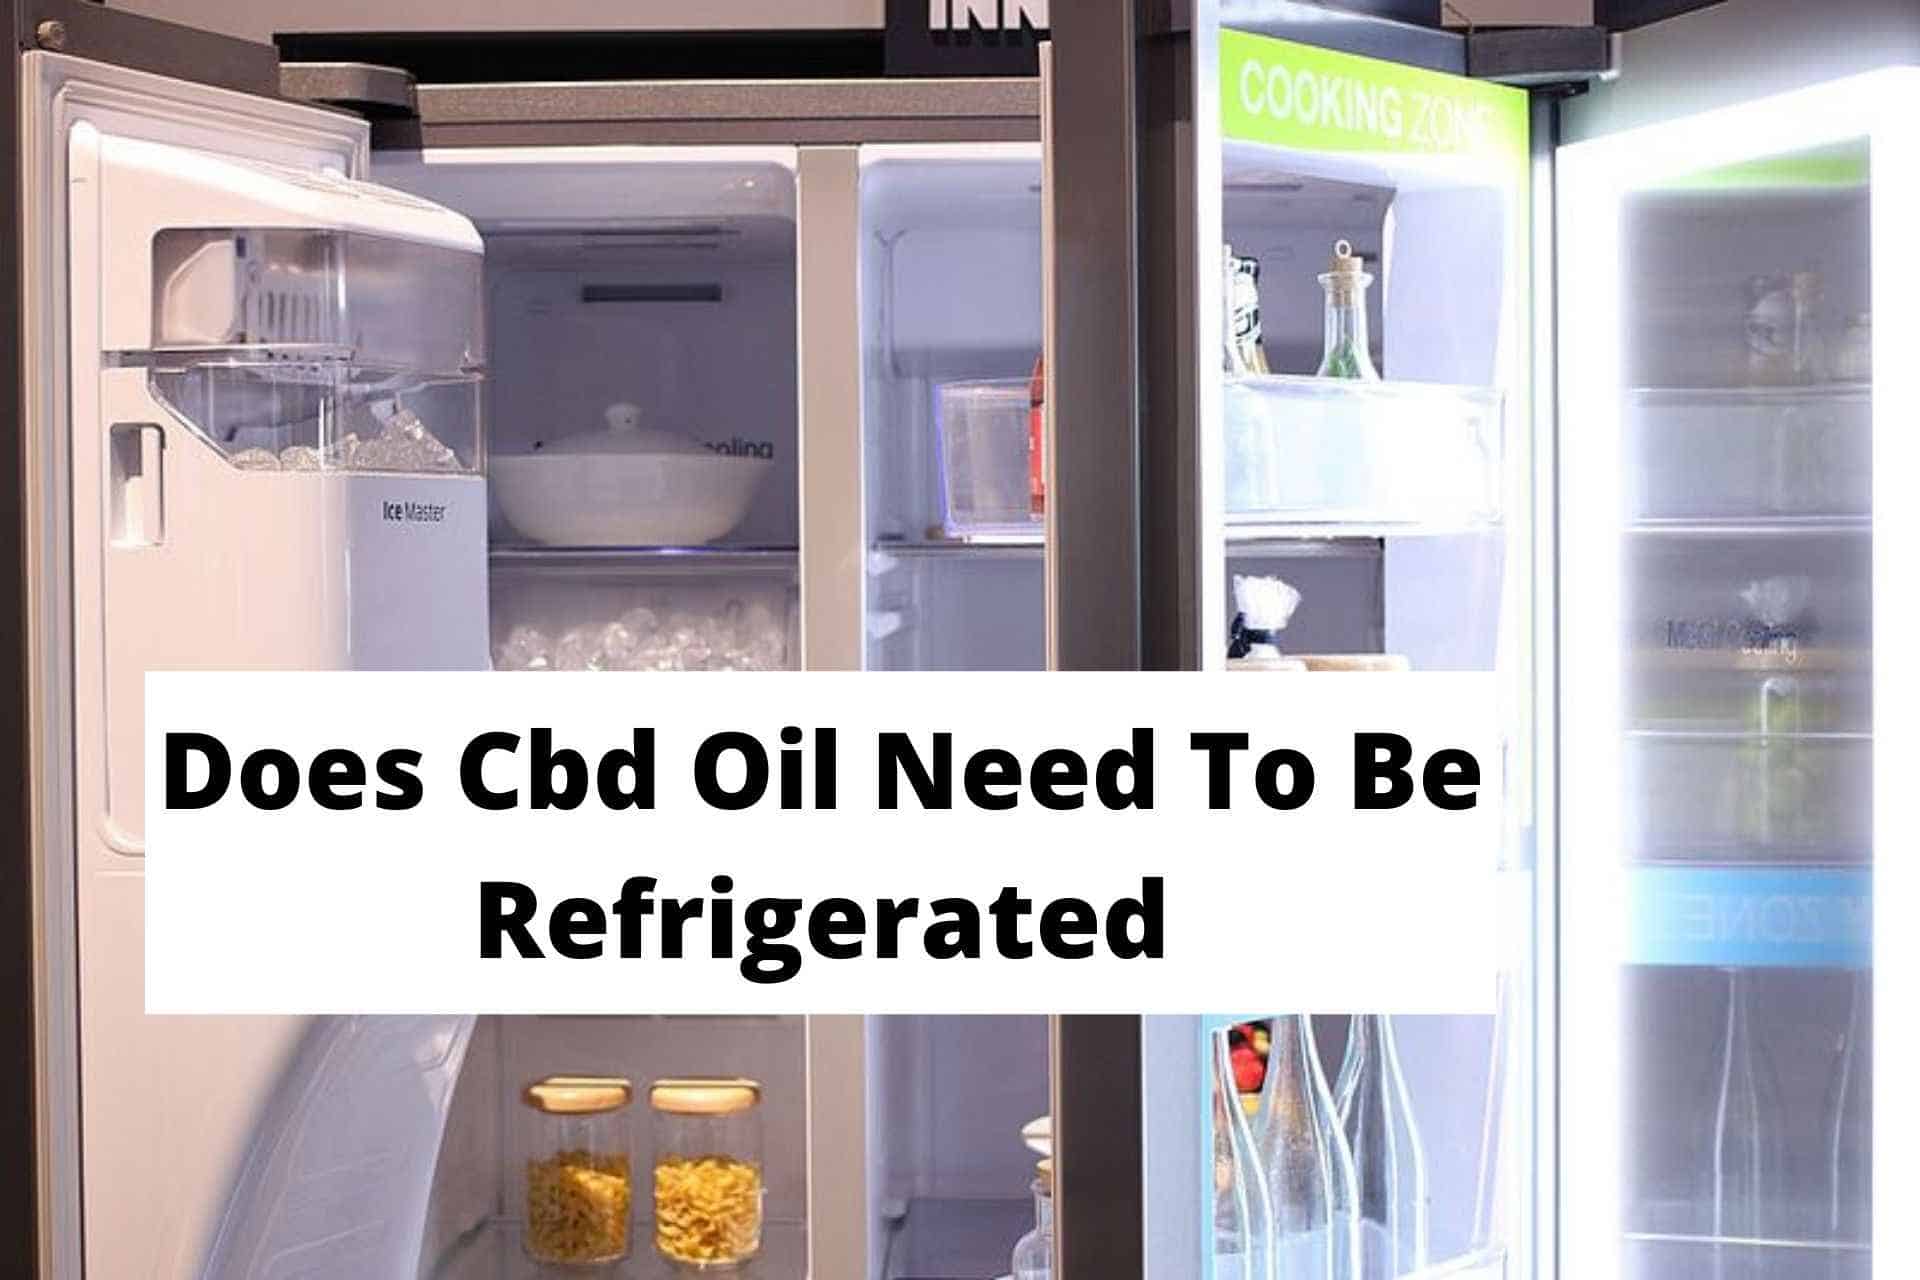 Does Cbd Oil Need To Be Refrigerated